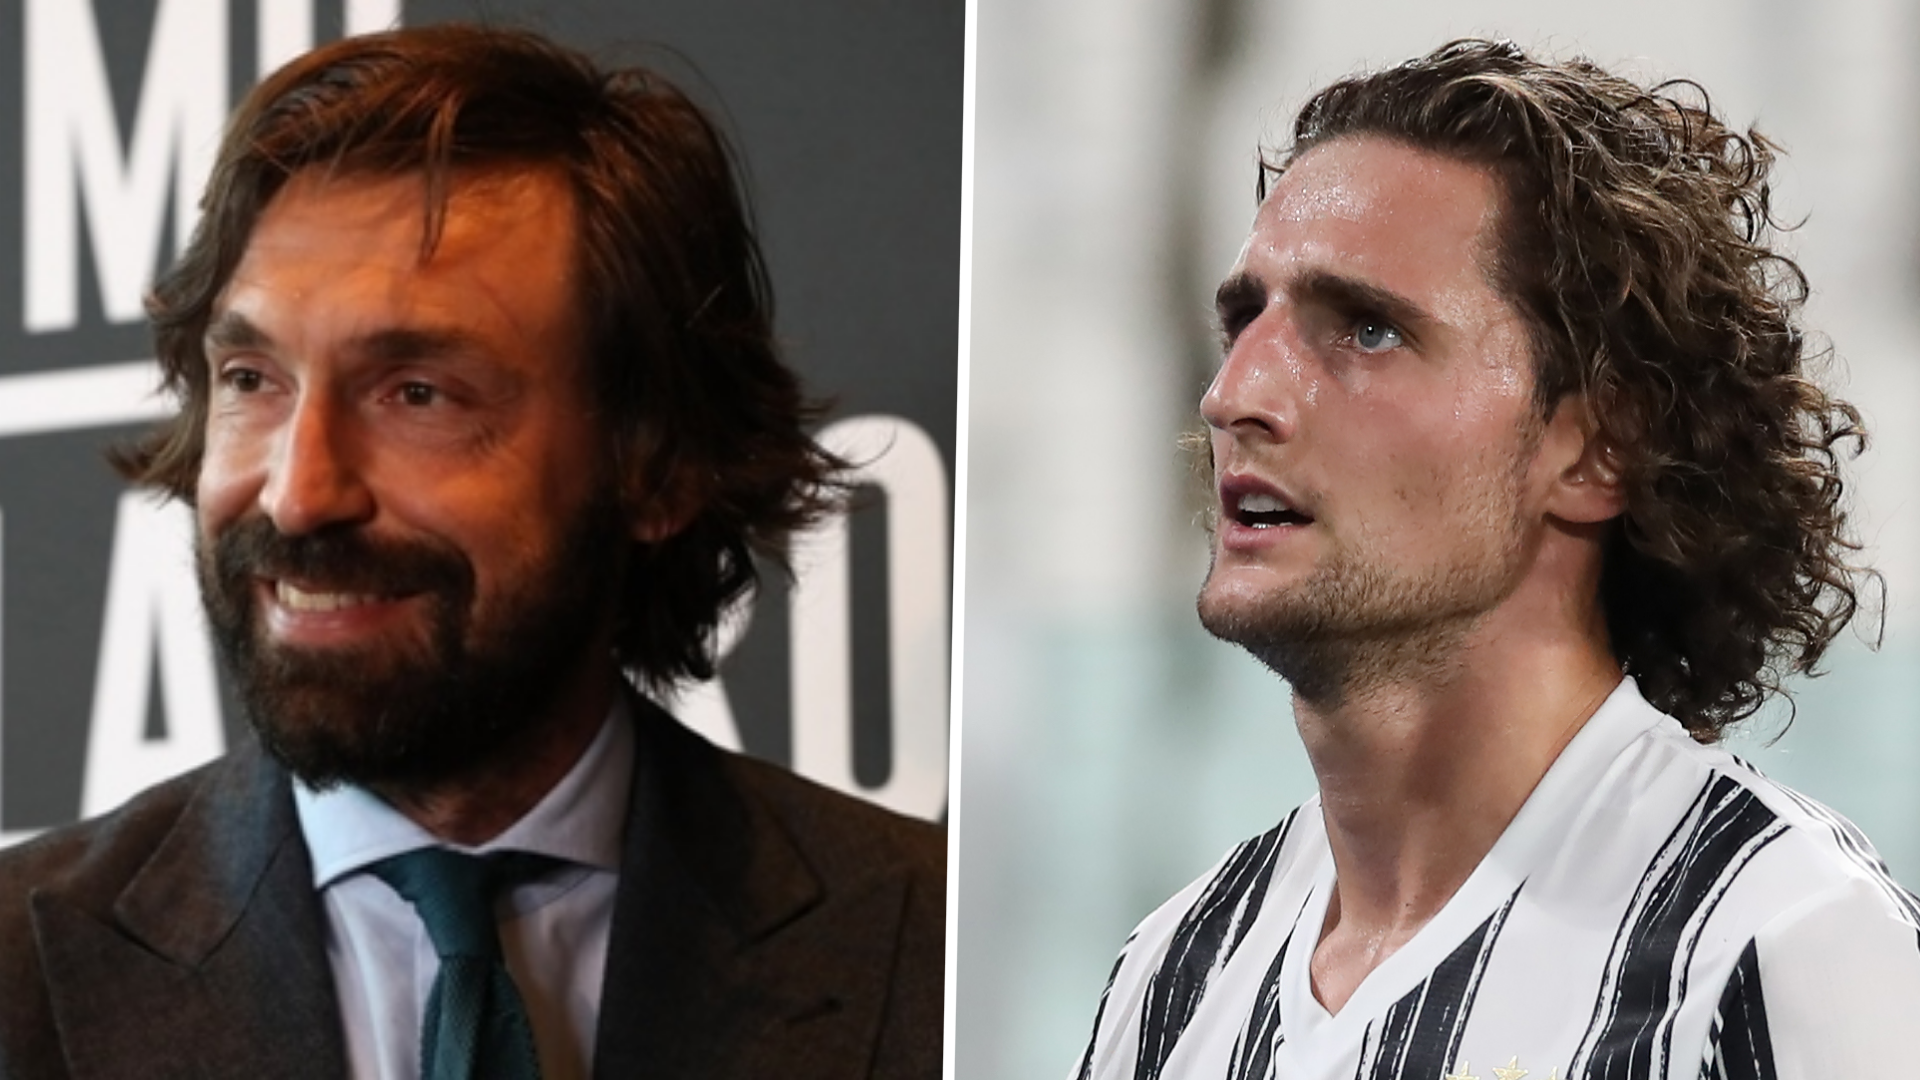 'Pirlo is the perfect coach for me!' - Rabiot confident new Juve boss will help him improve